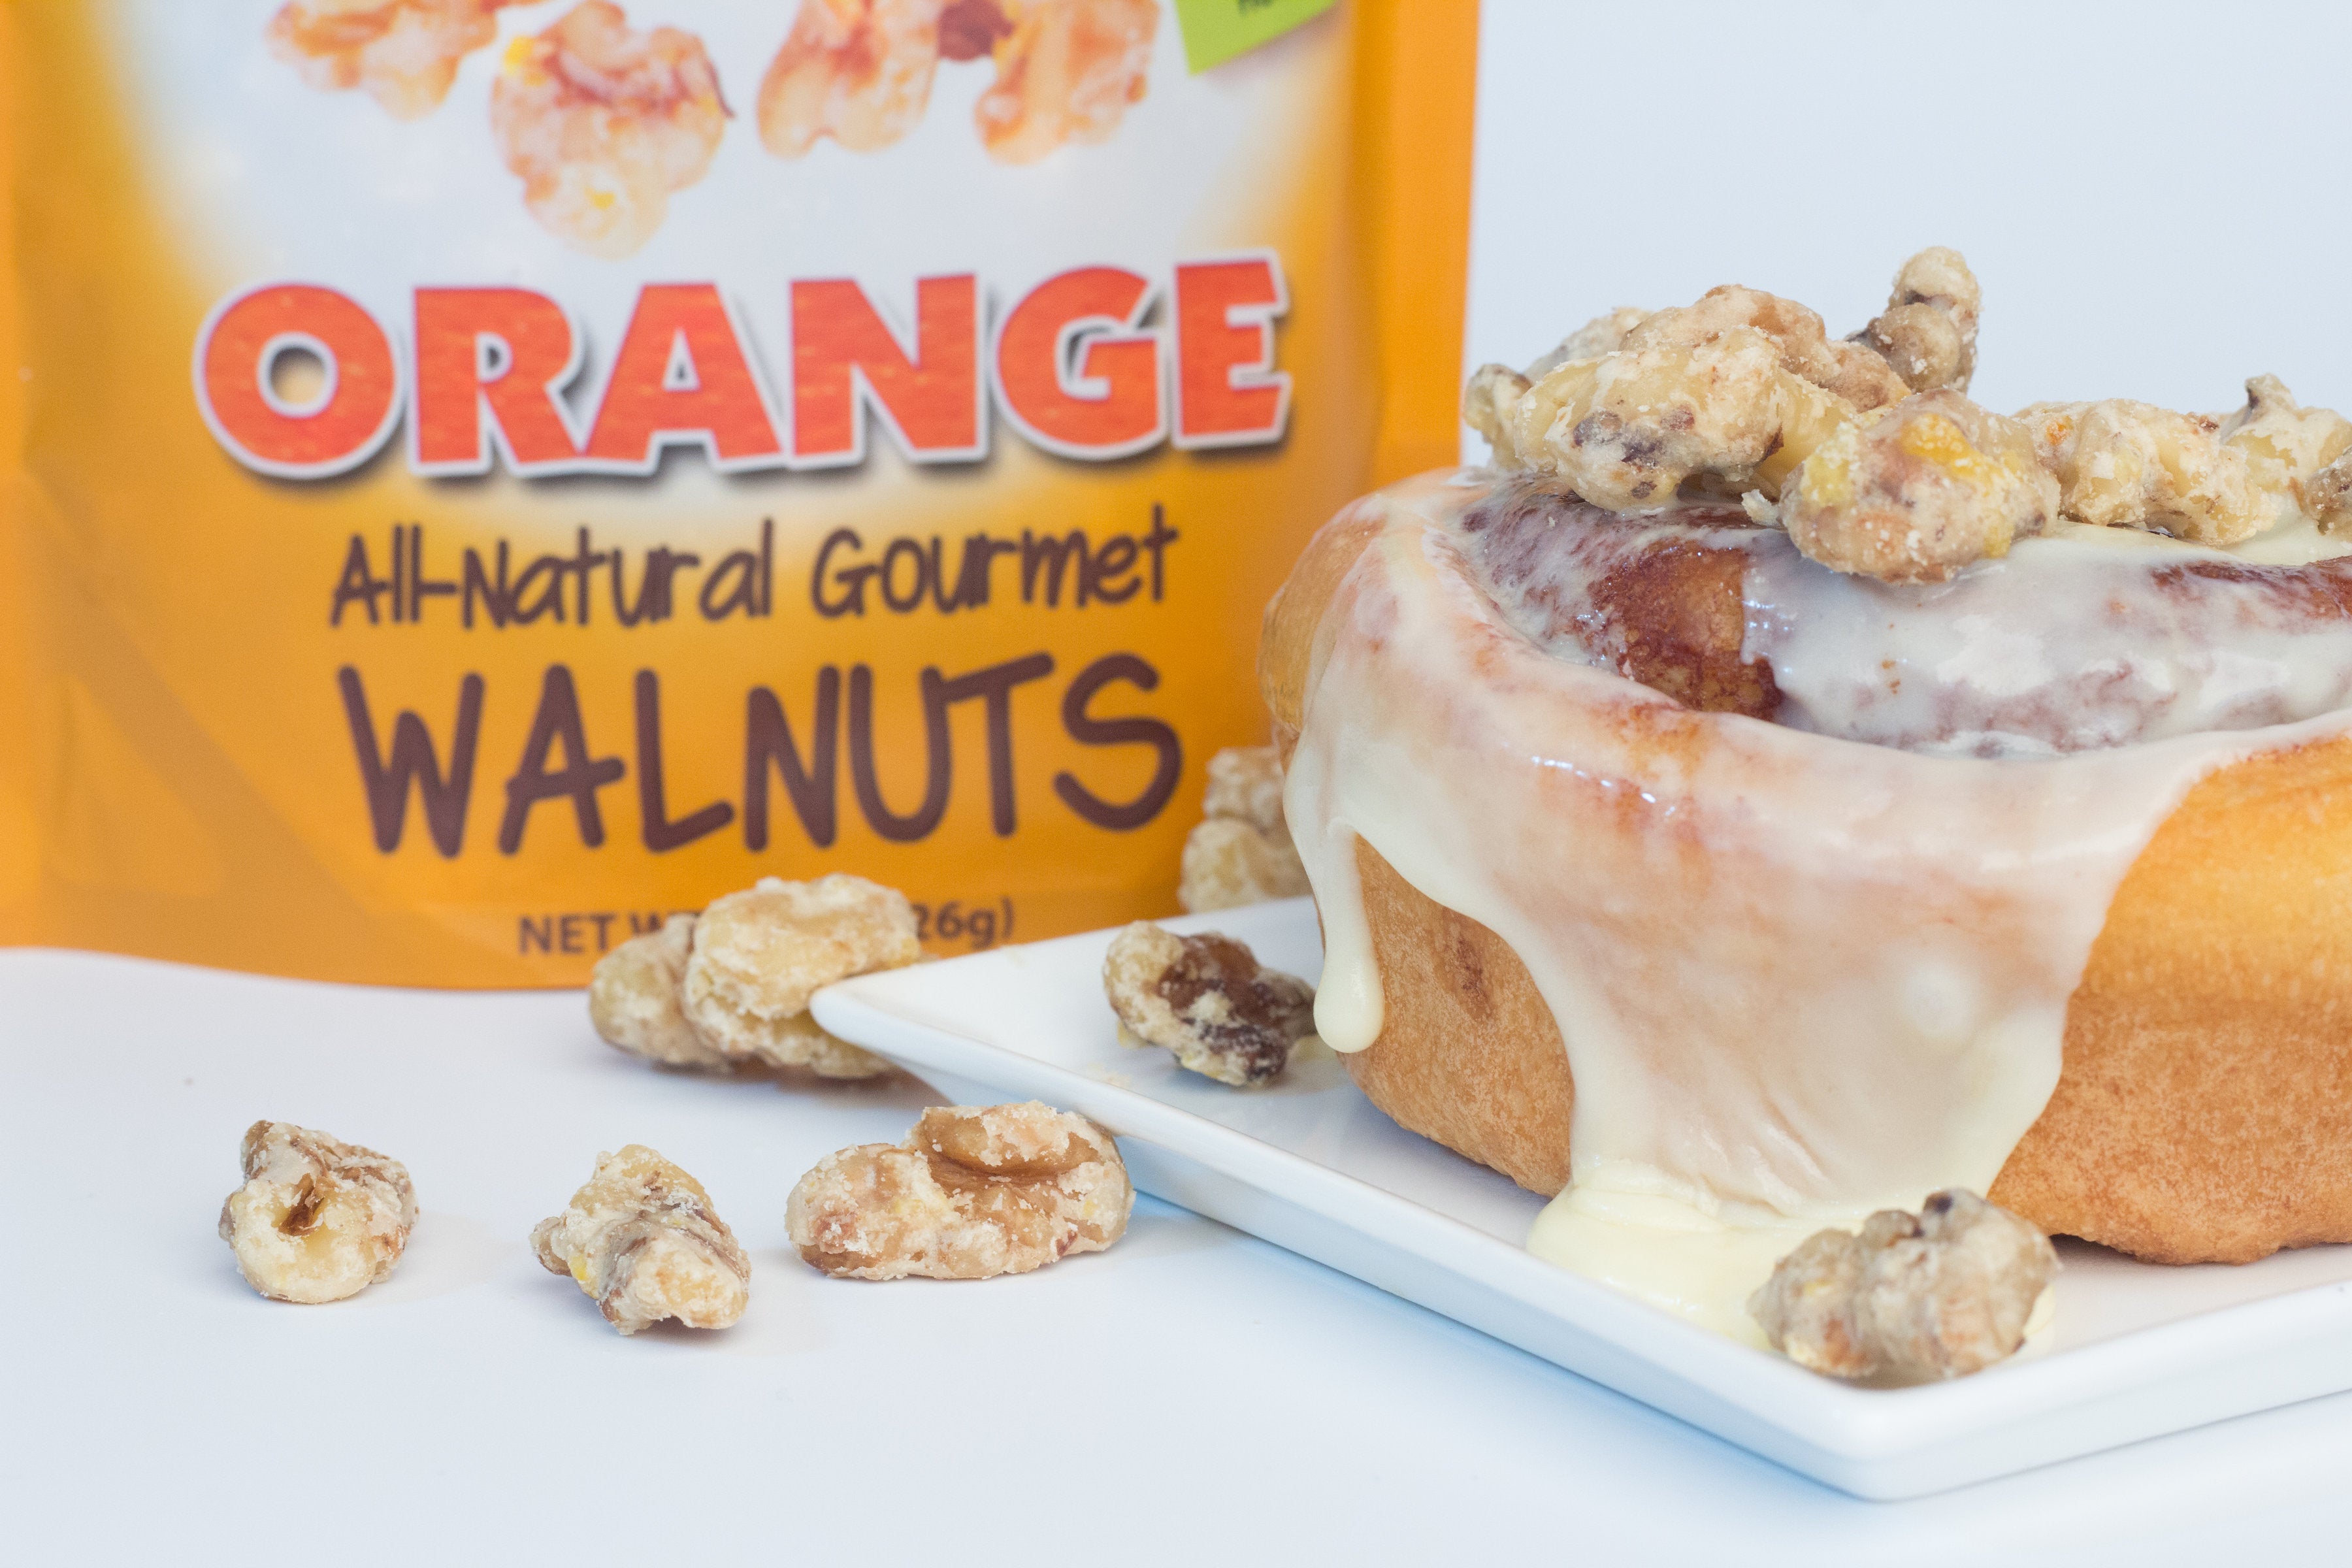 Orange coated walnut snacks being used as a topping for a cinnamon roll.